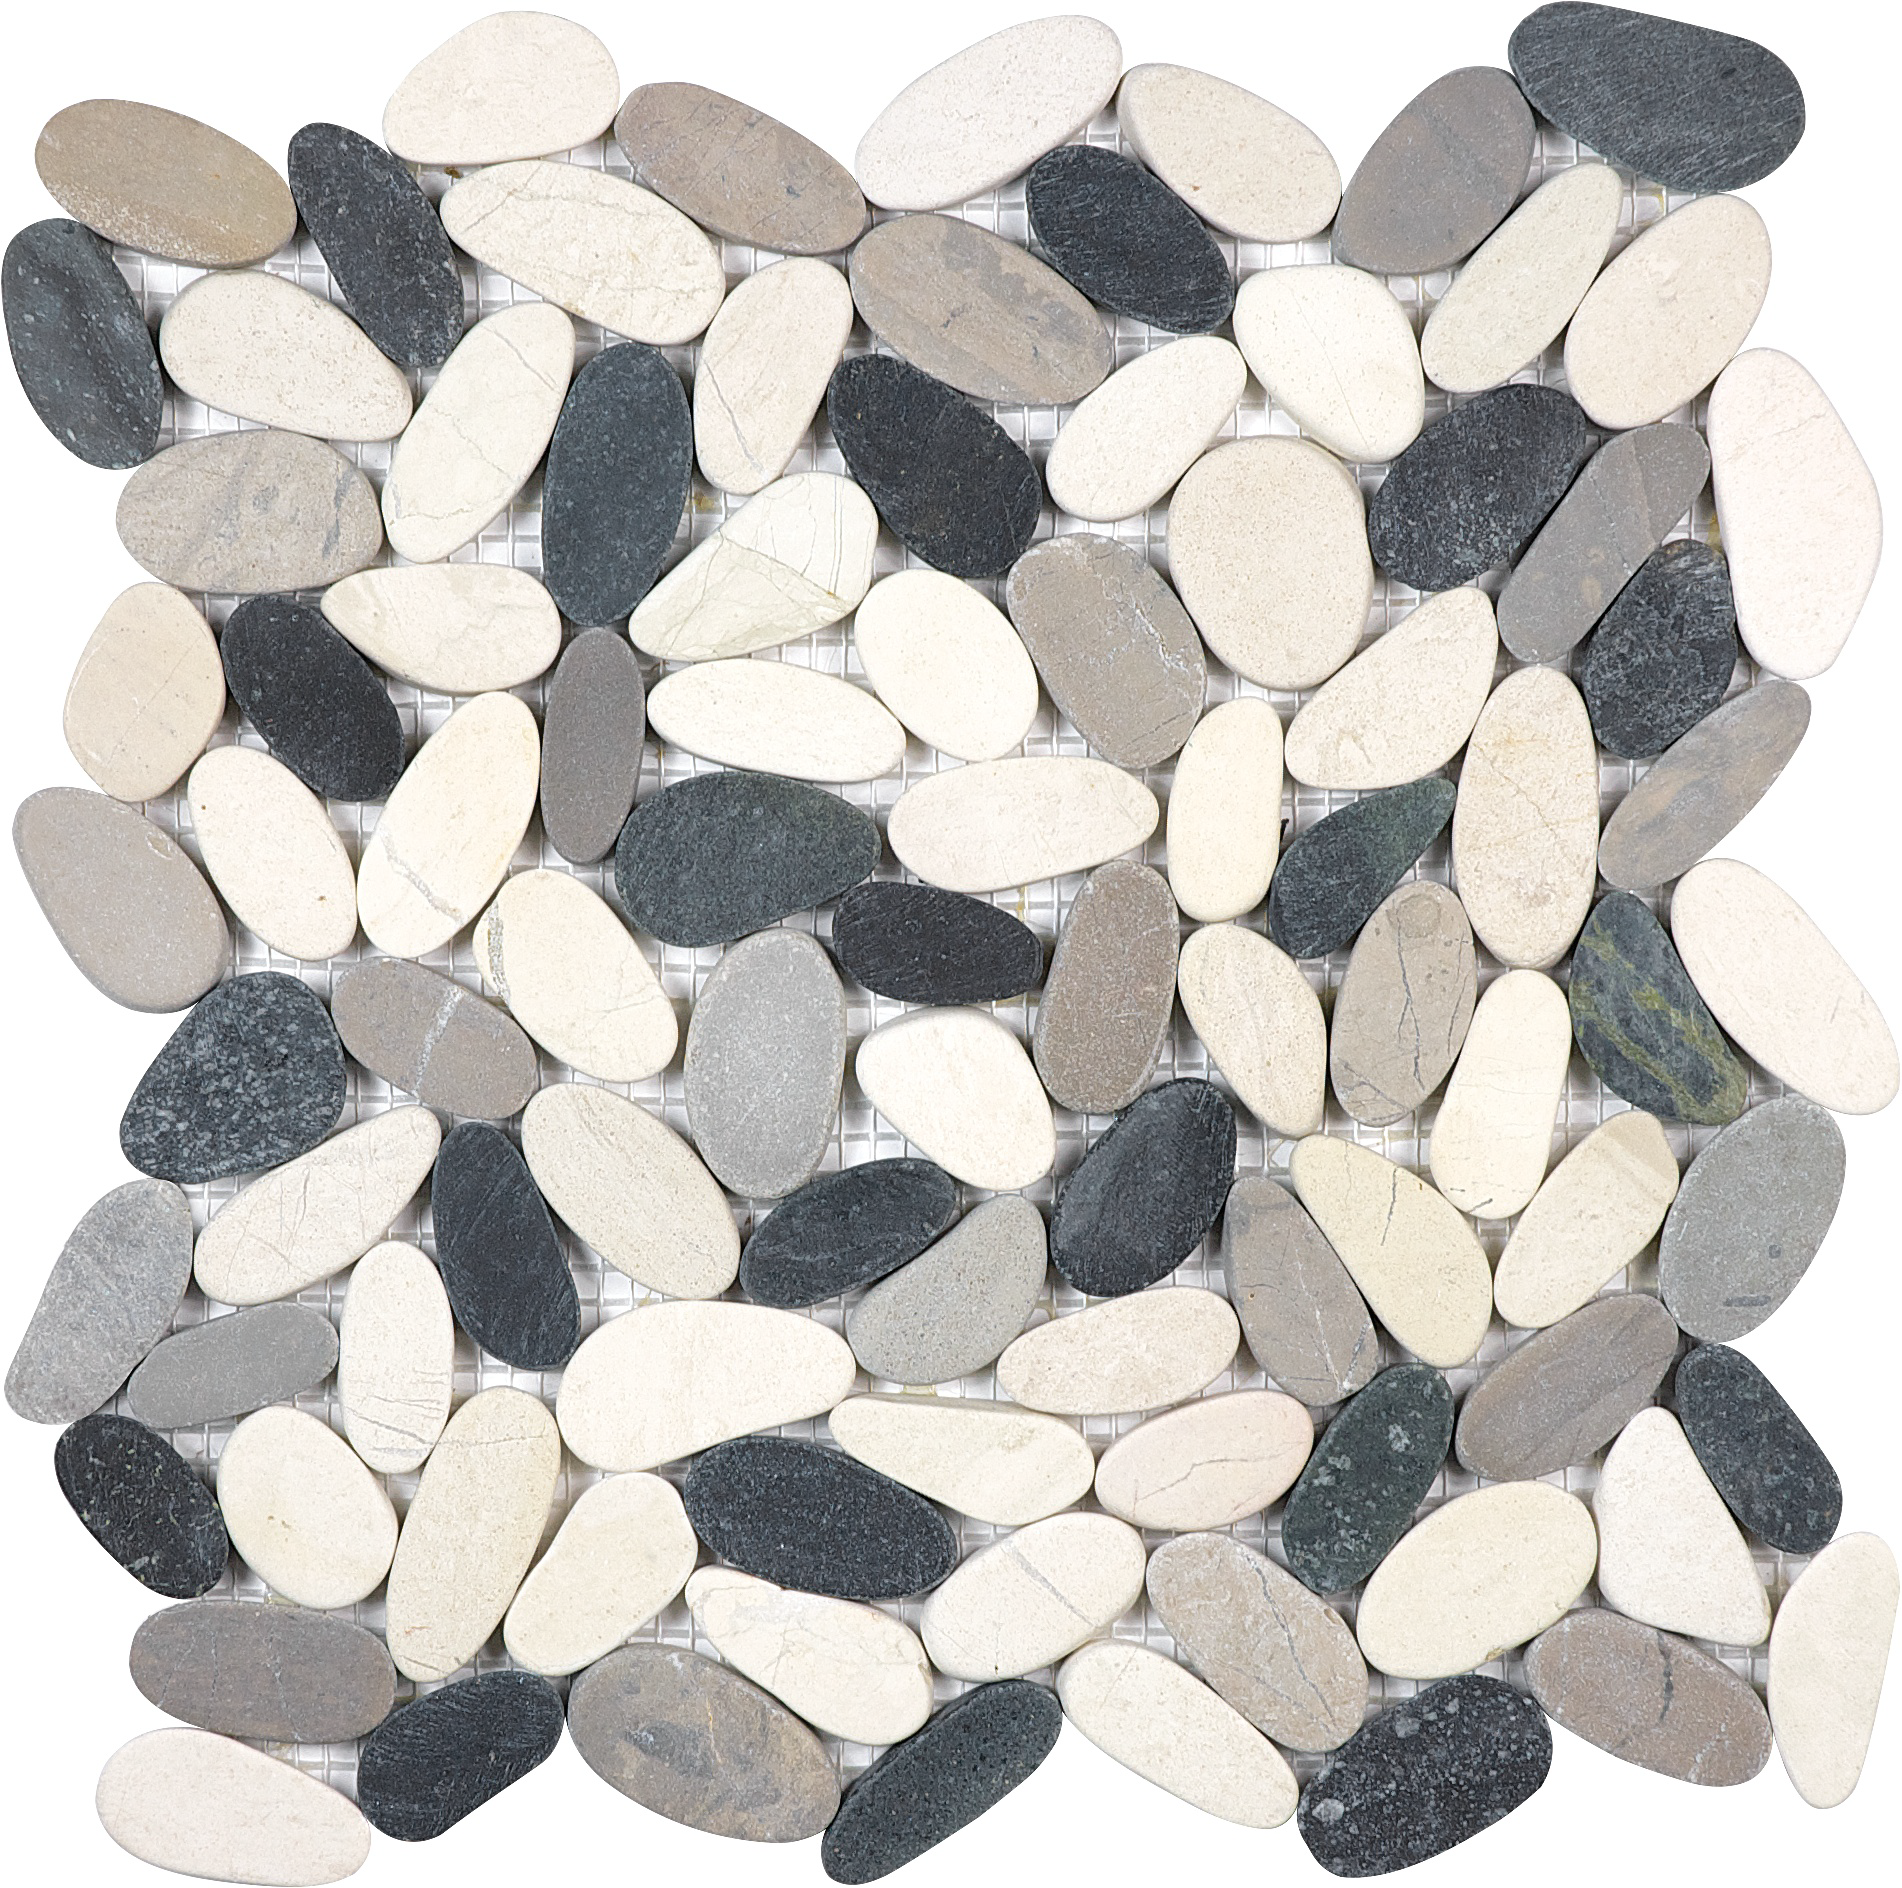 pebble tranquil cool flat pebble pattern natural stone mosaic from zen anatolia collection distributed by surface group international matte finish straight edge edge mesh shape